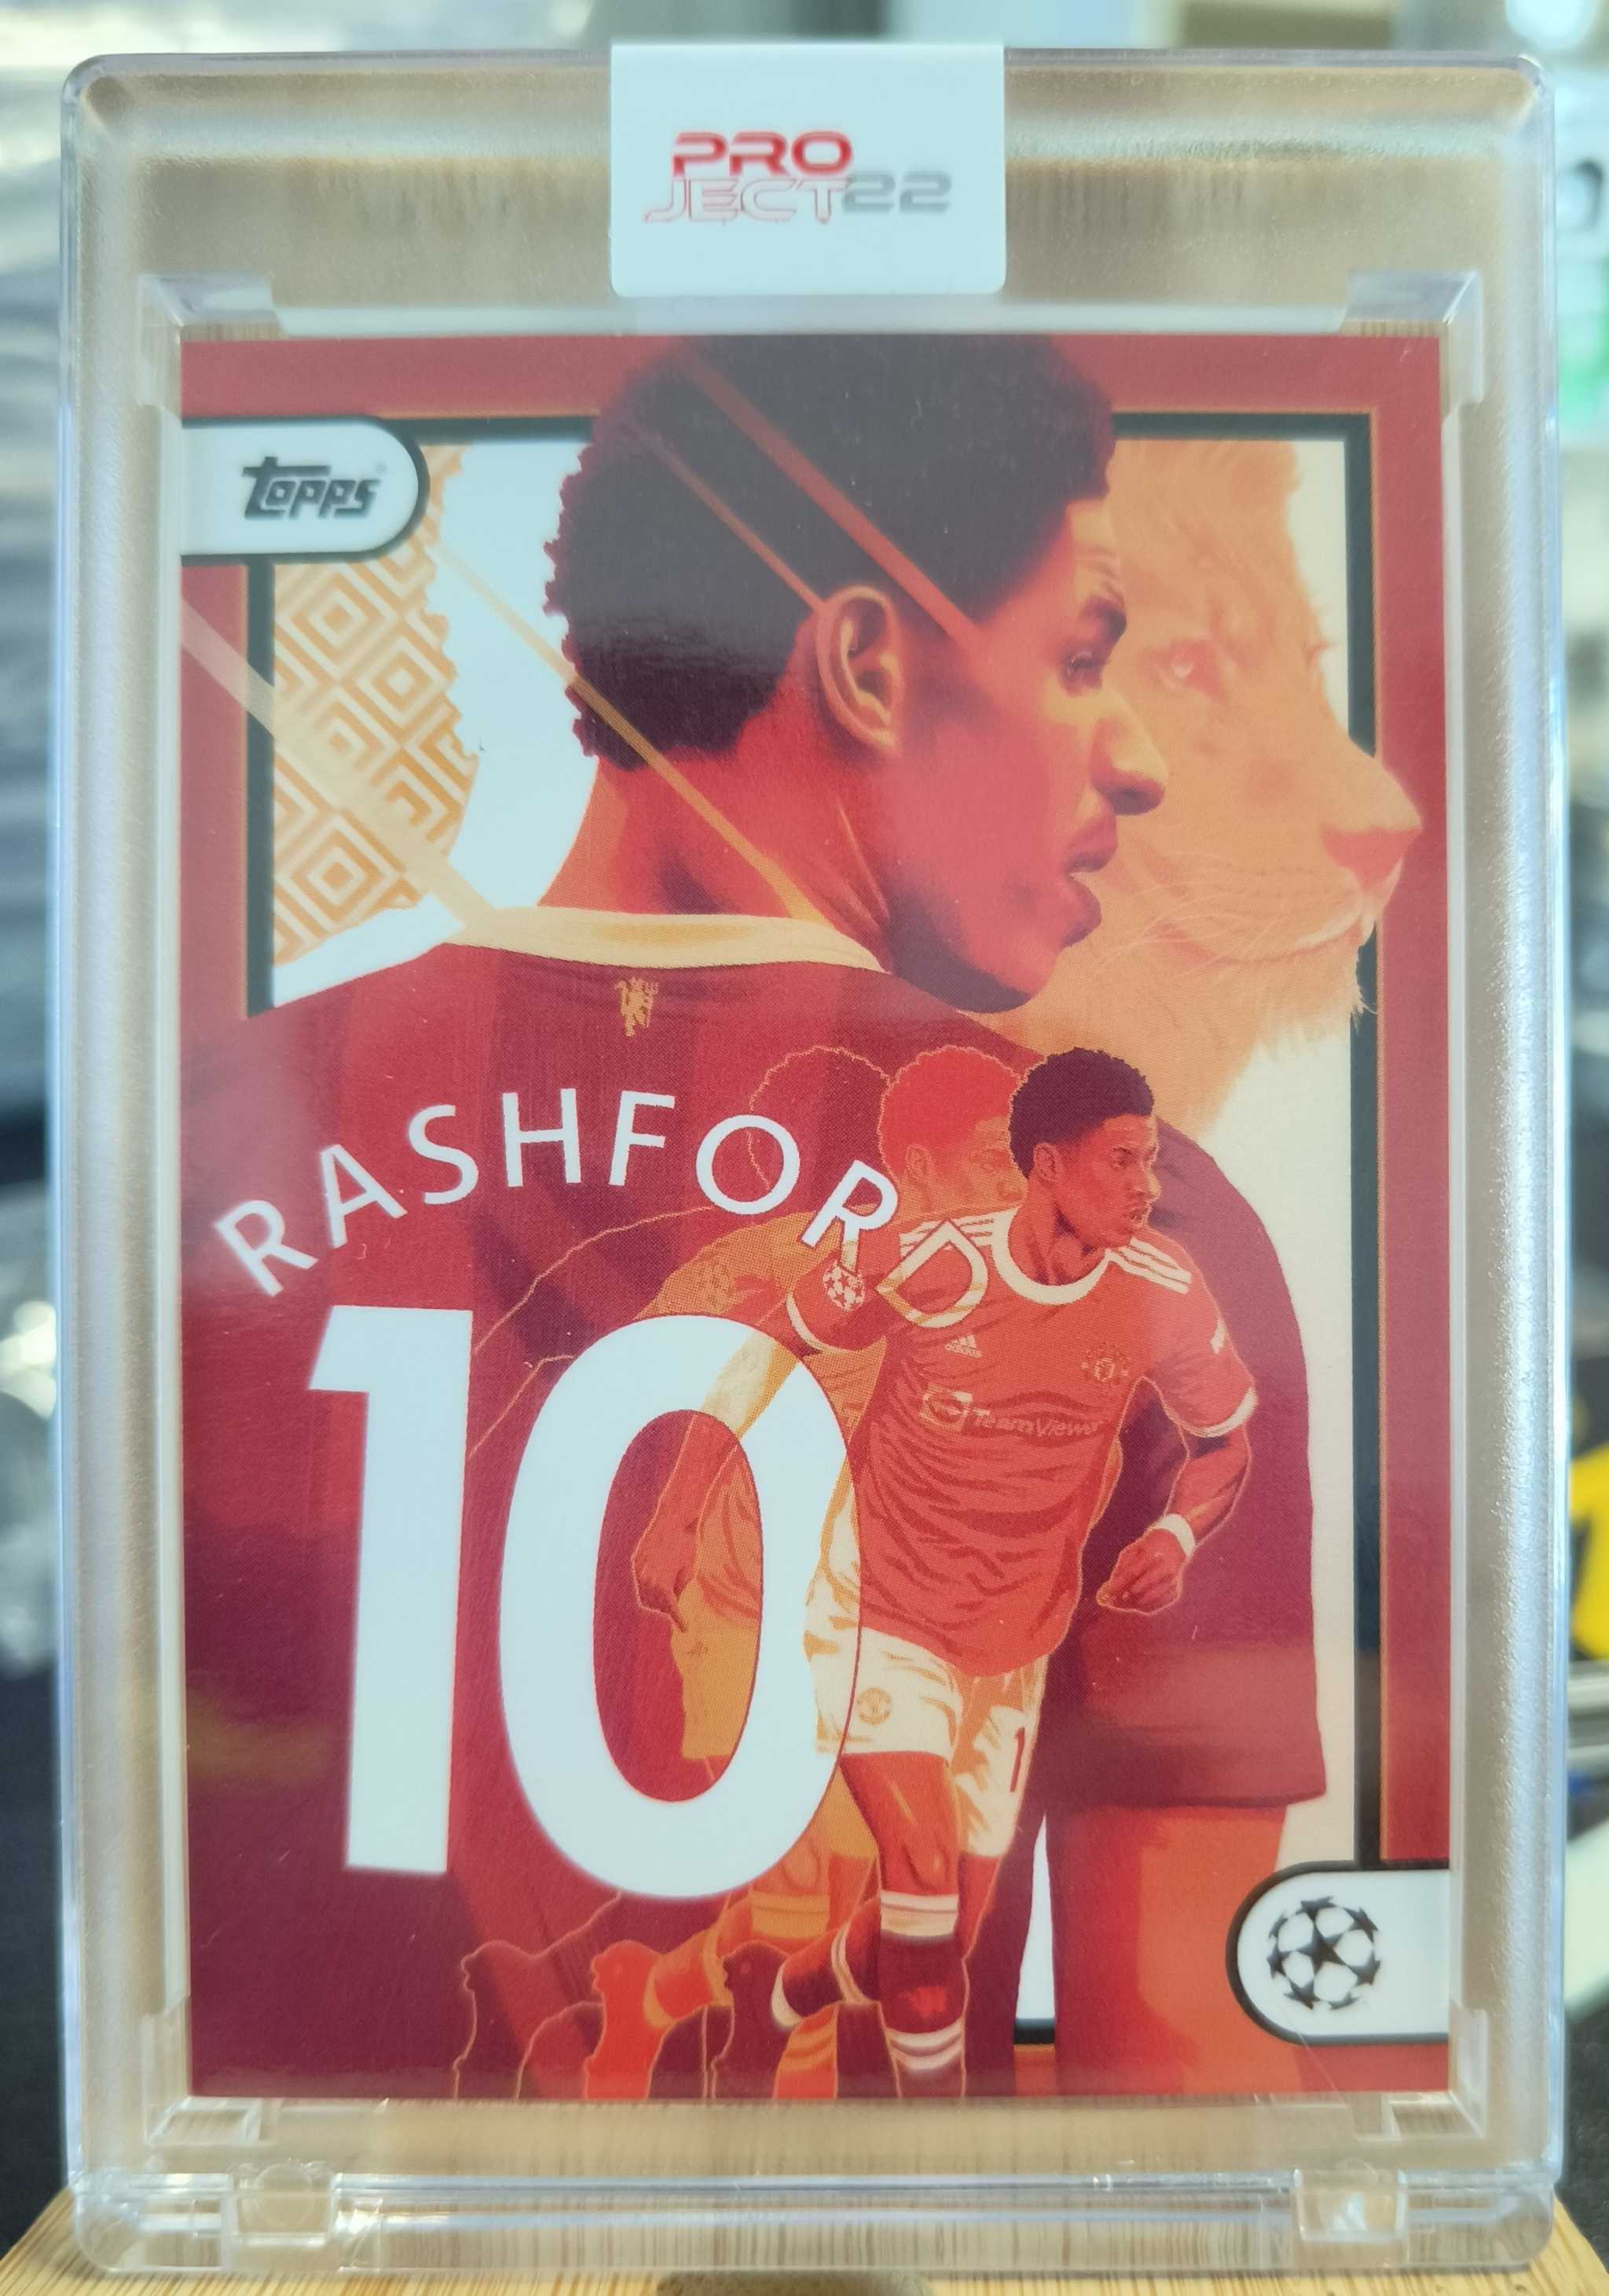 2022 Topps Project22 Marcus Rashford by Doaly MANU -